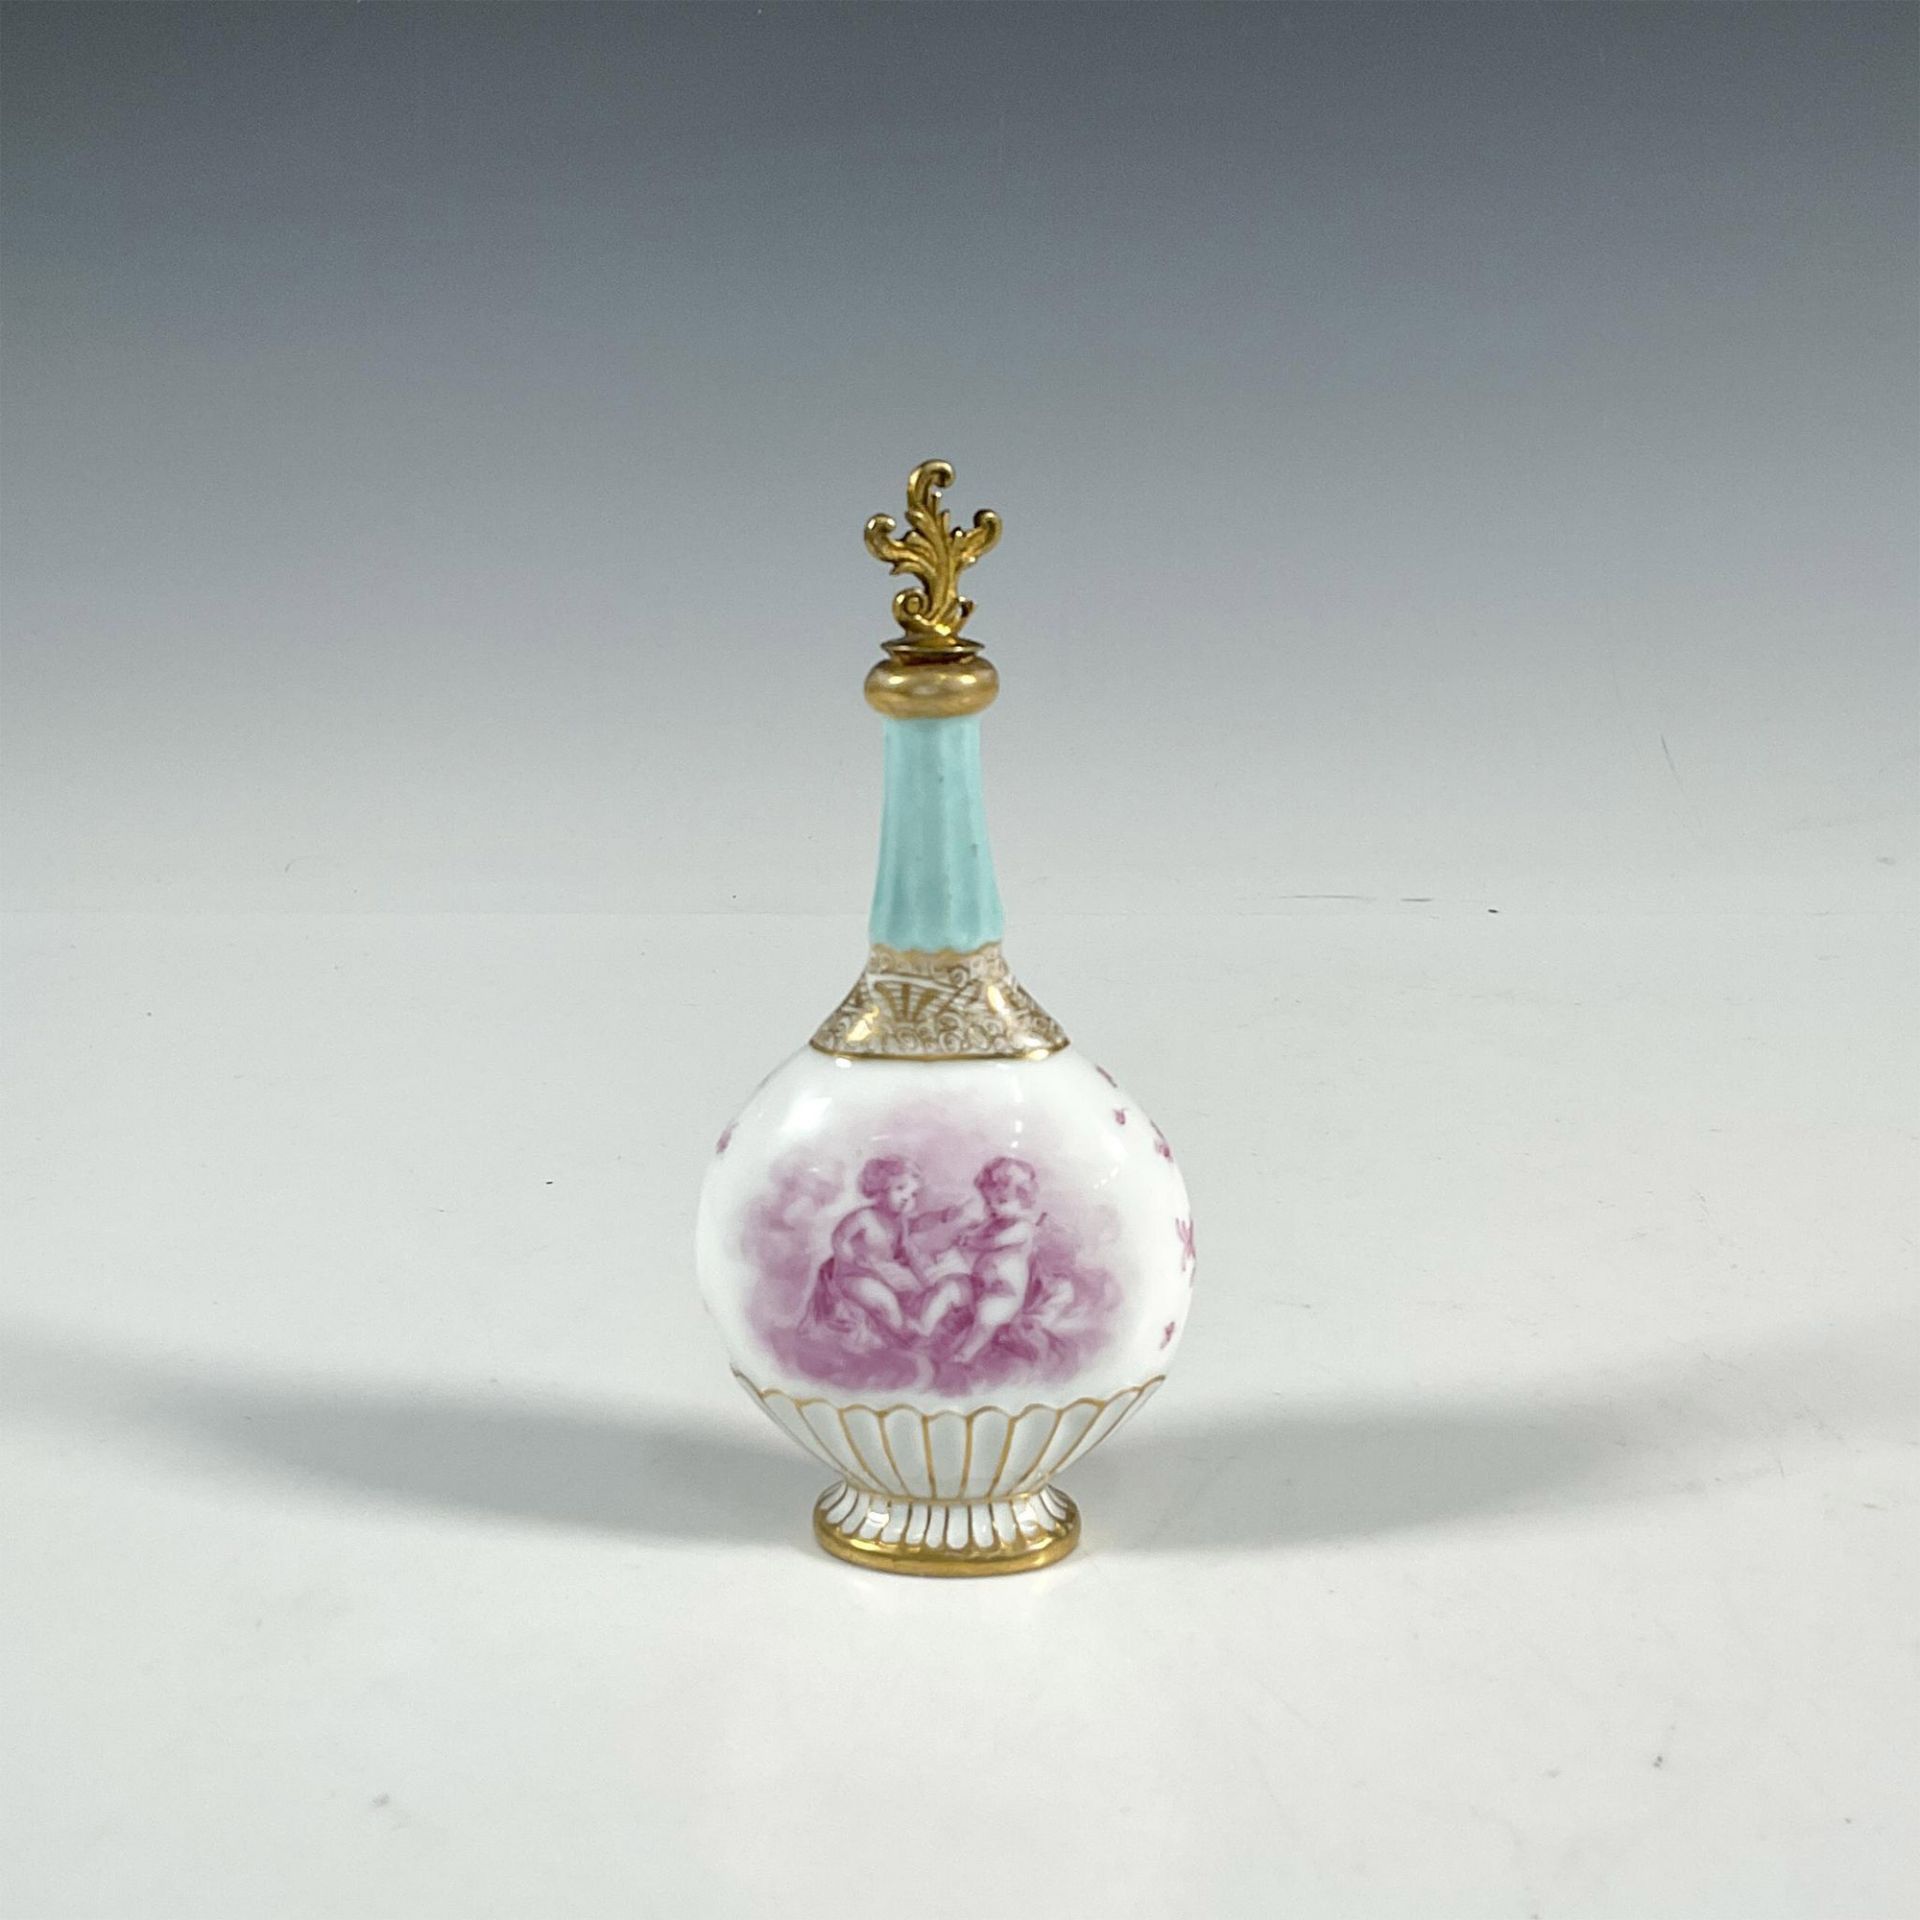 18th Century European Porcelain Scent Bottle and Stopper - Image 4 of 5